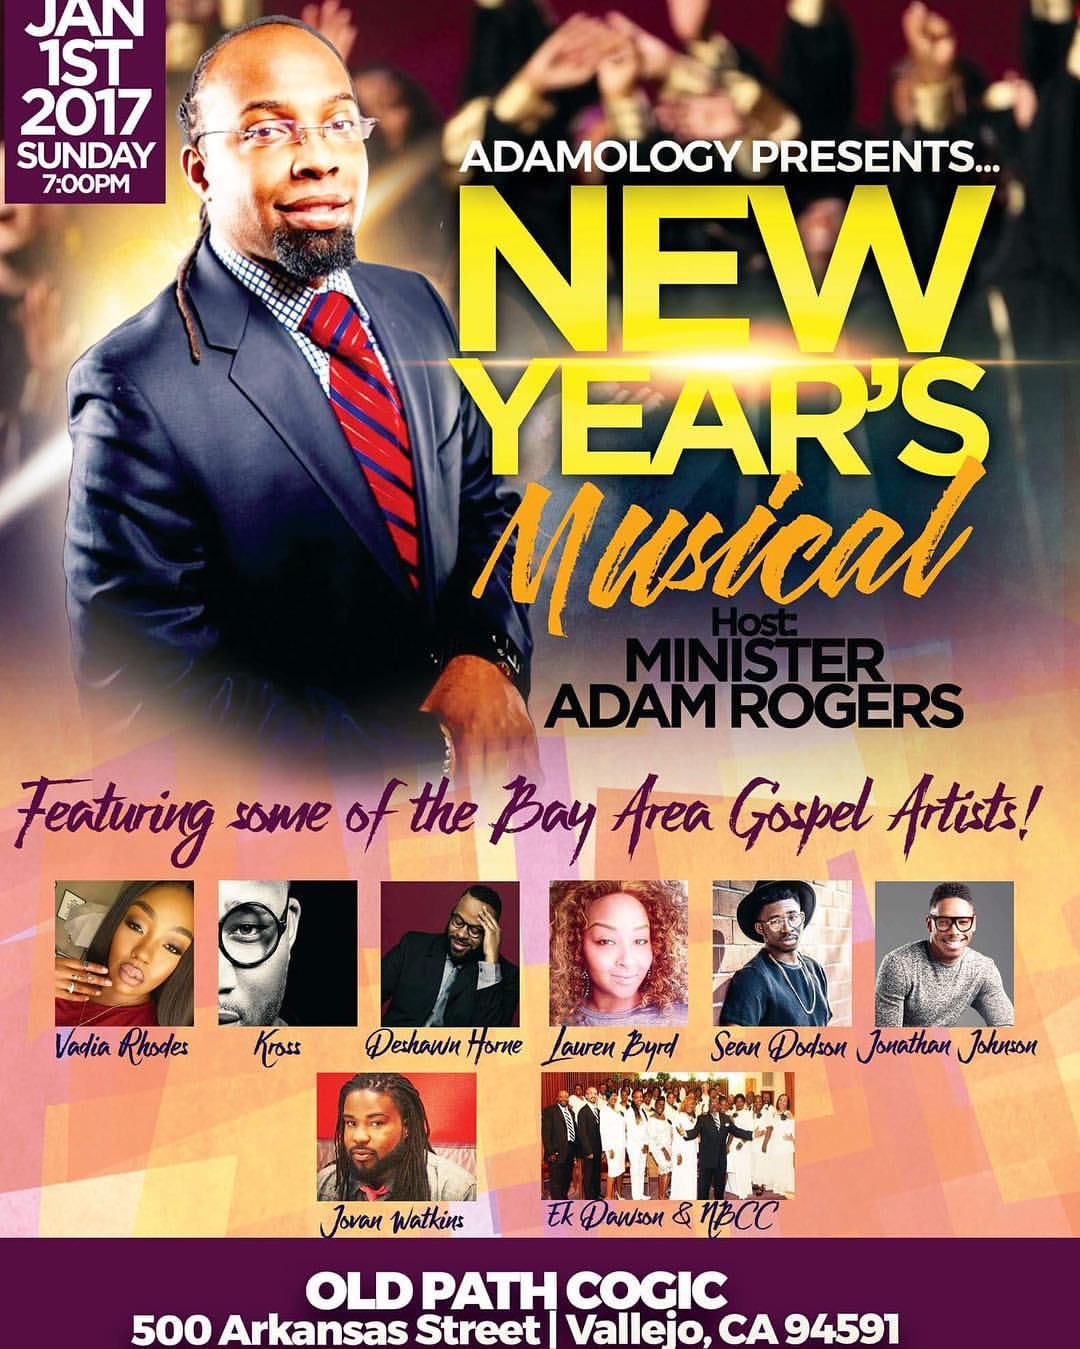 Adamology Presents - 2017 New Year's Musical